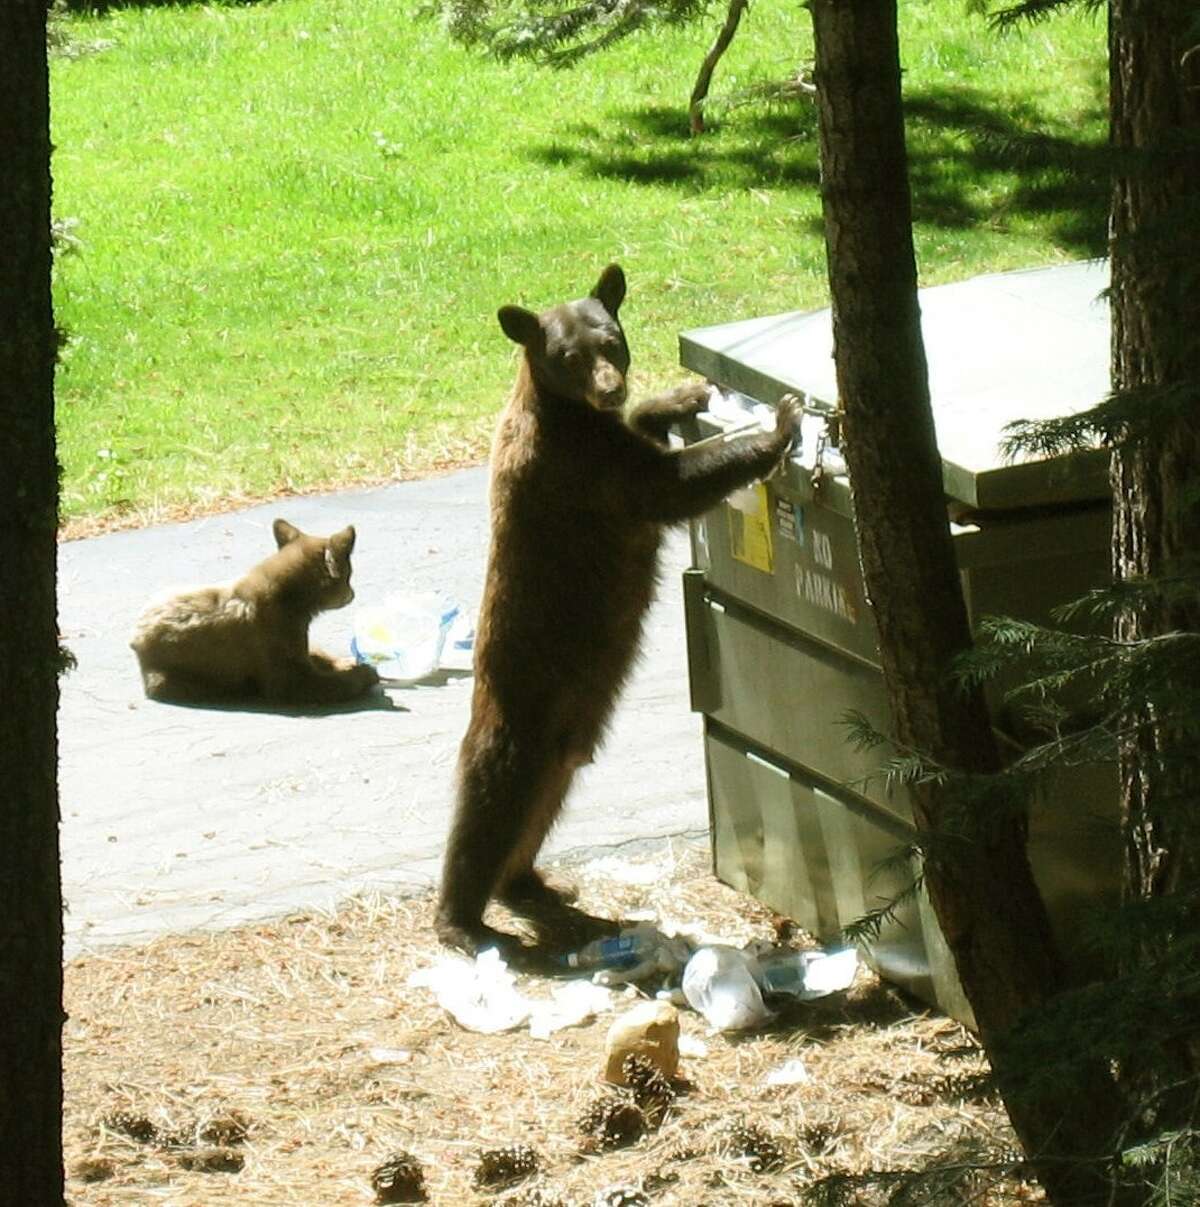 Tensions between bears and humans in Tahoe this summer are running high.